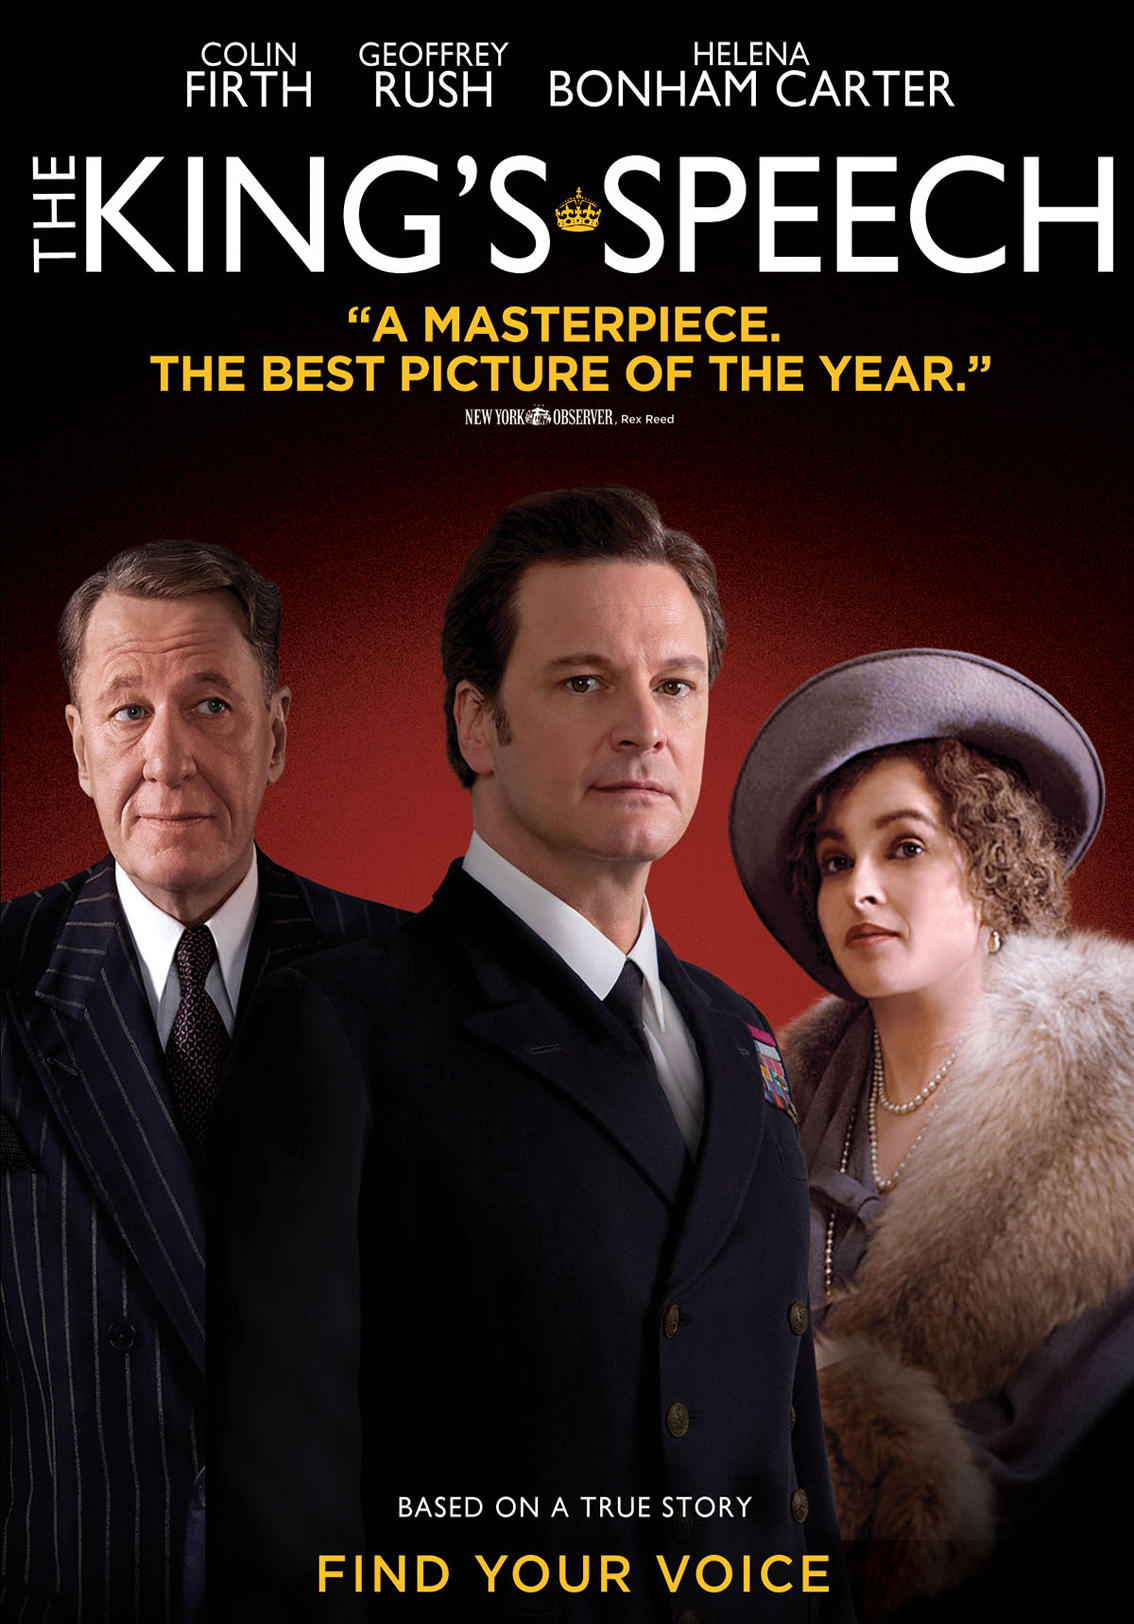 the king's speech movie reflection paper